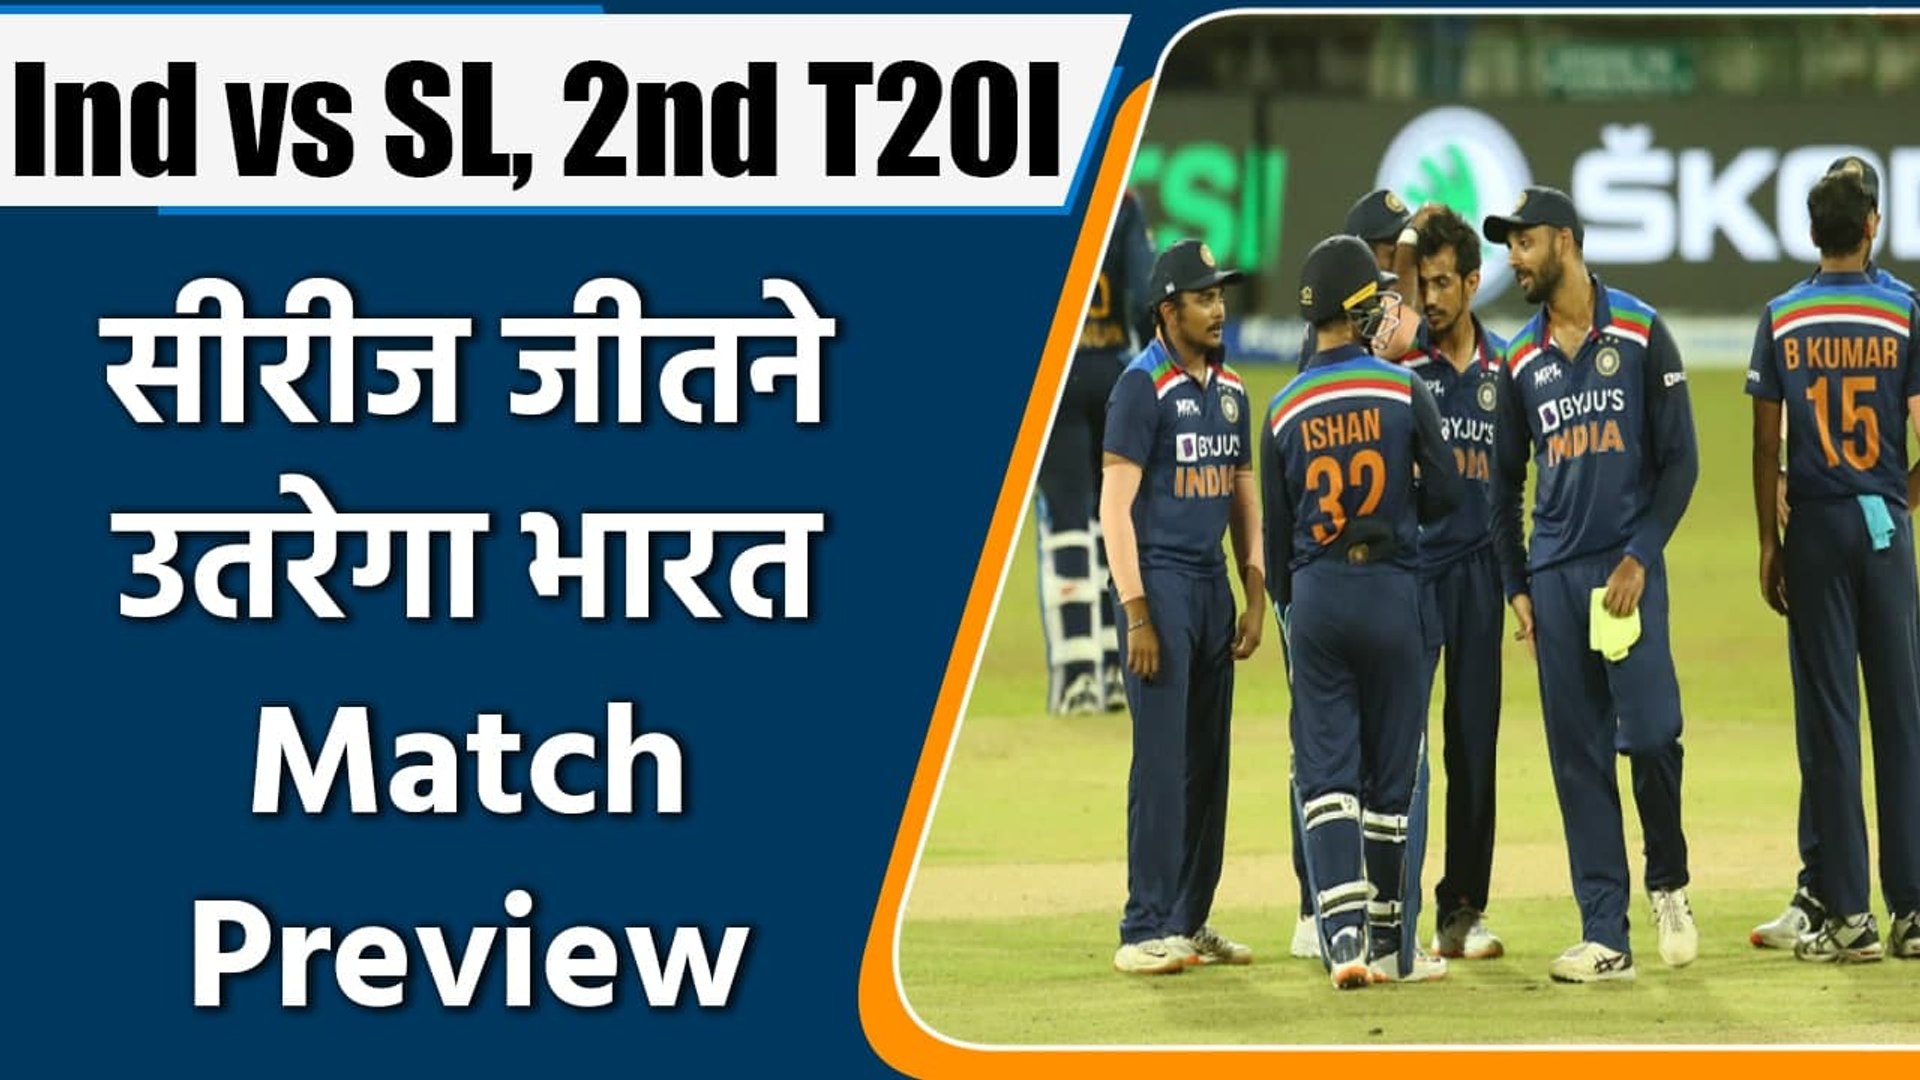 Ind vs SL 2nd T20I: Match Preview | Match Prediction | Match timings | Oneindia Sports